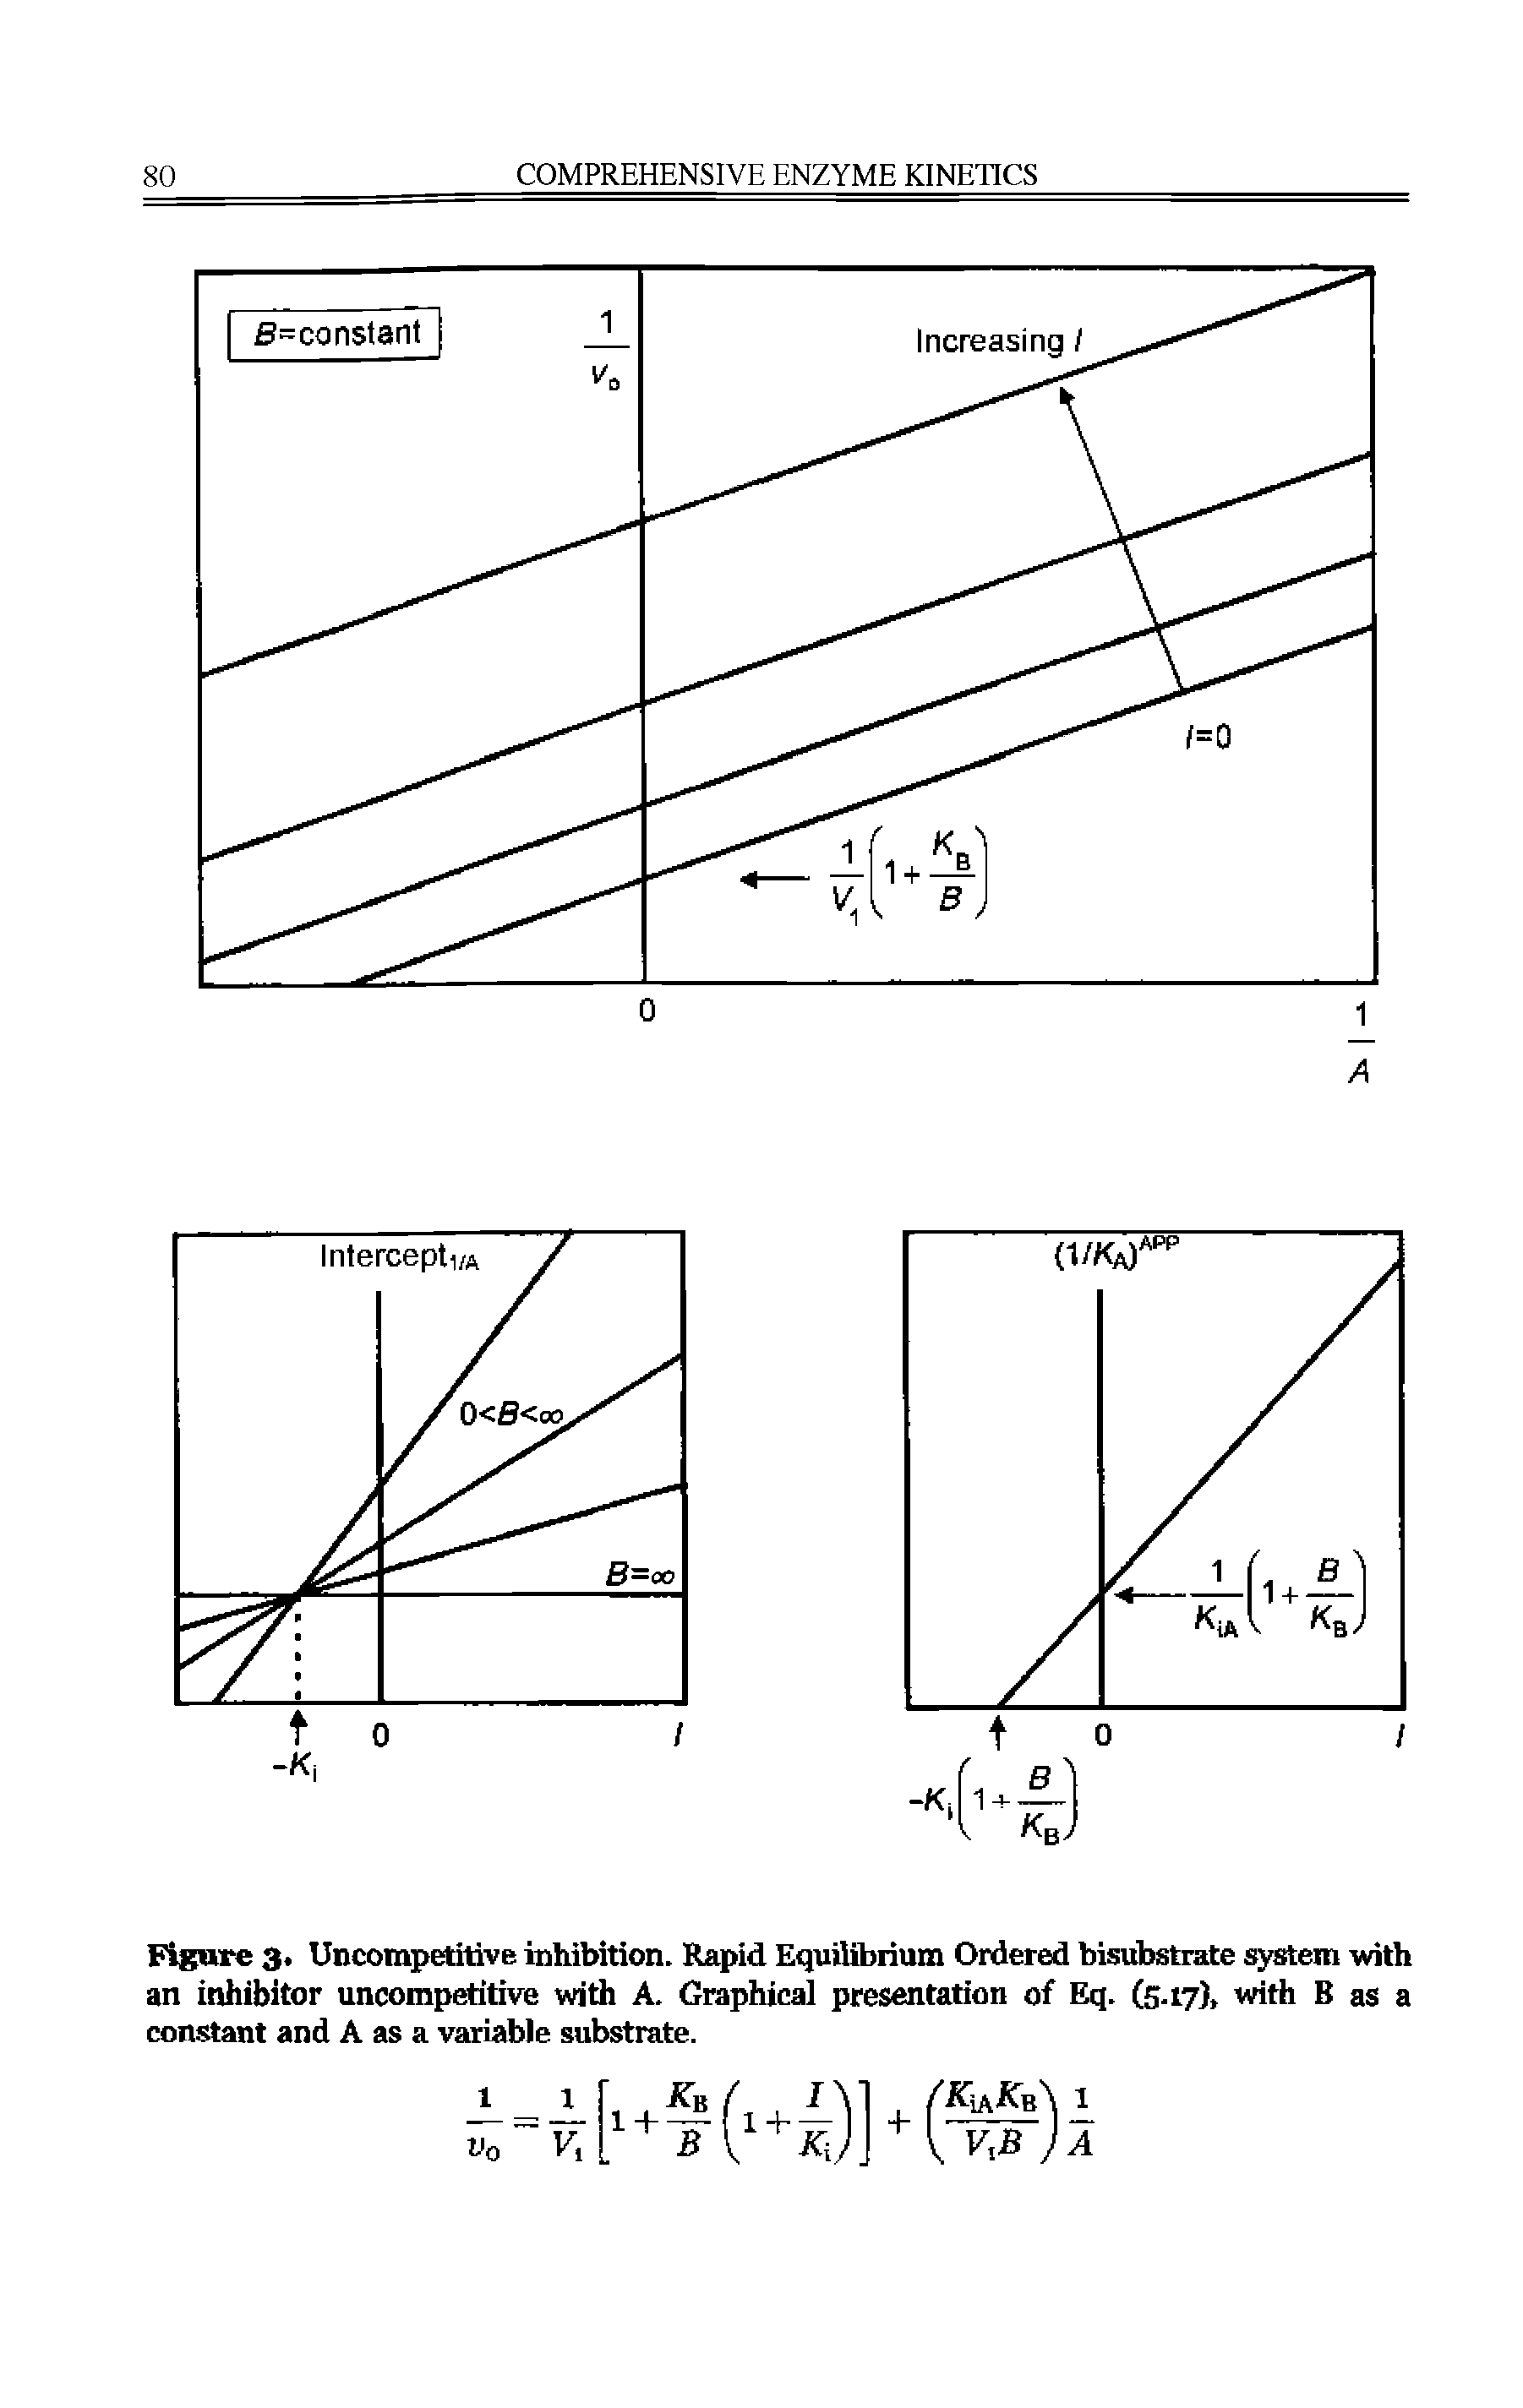 Figure 3. Uncompetitive inhibition. Rapid Equilibrium Ordered bisubstrate s em with an inhibitor uncompetitive with A. Graphical presentation of Eq. (5-i7) B as a constant and A as a variable substrate.